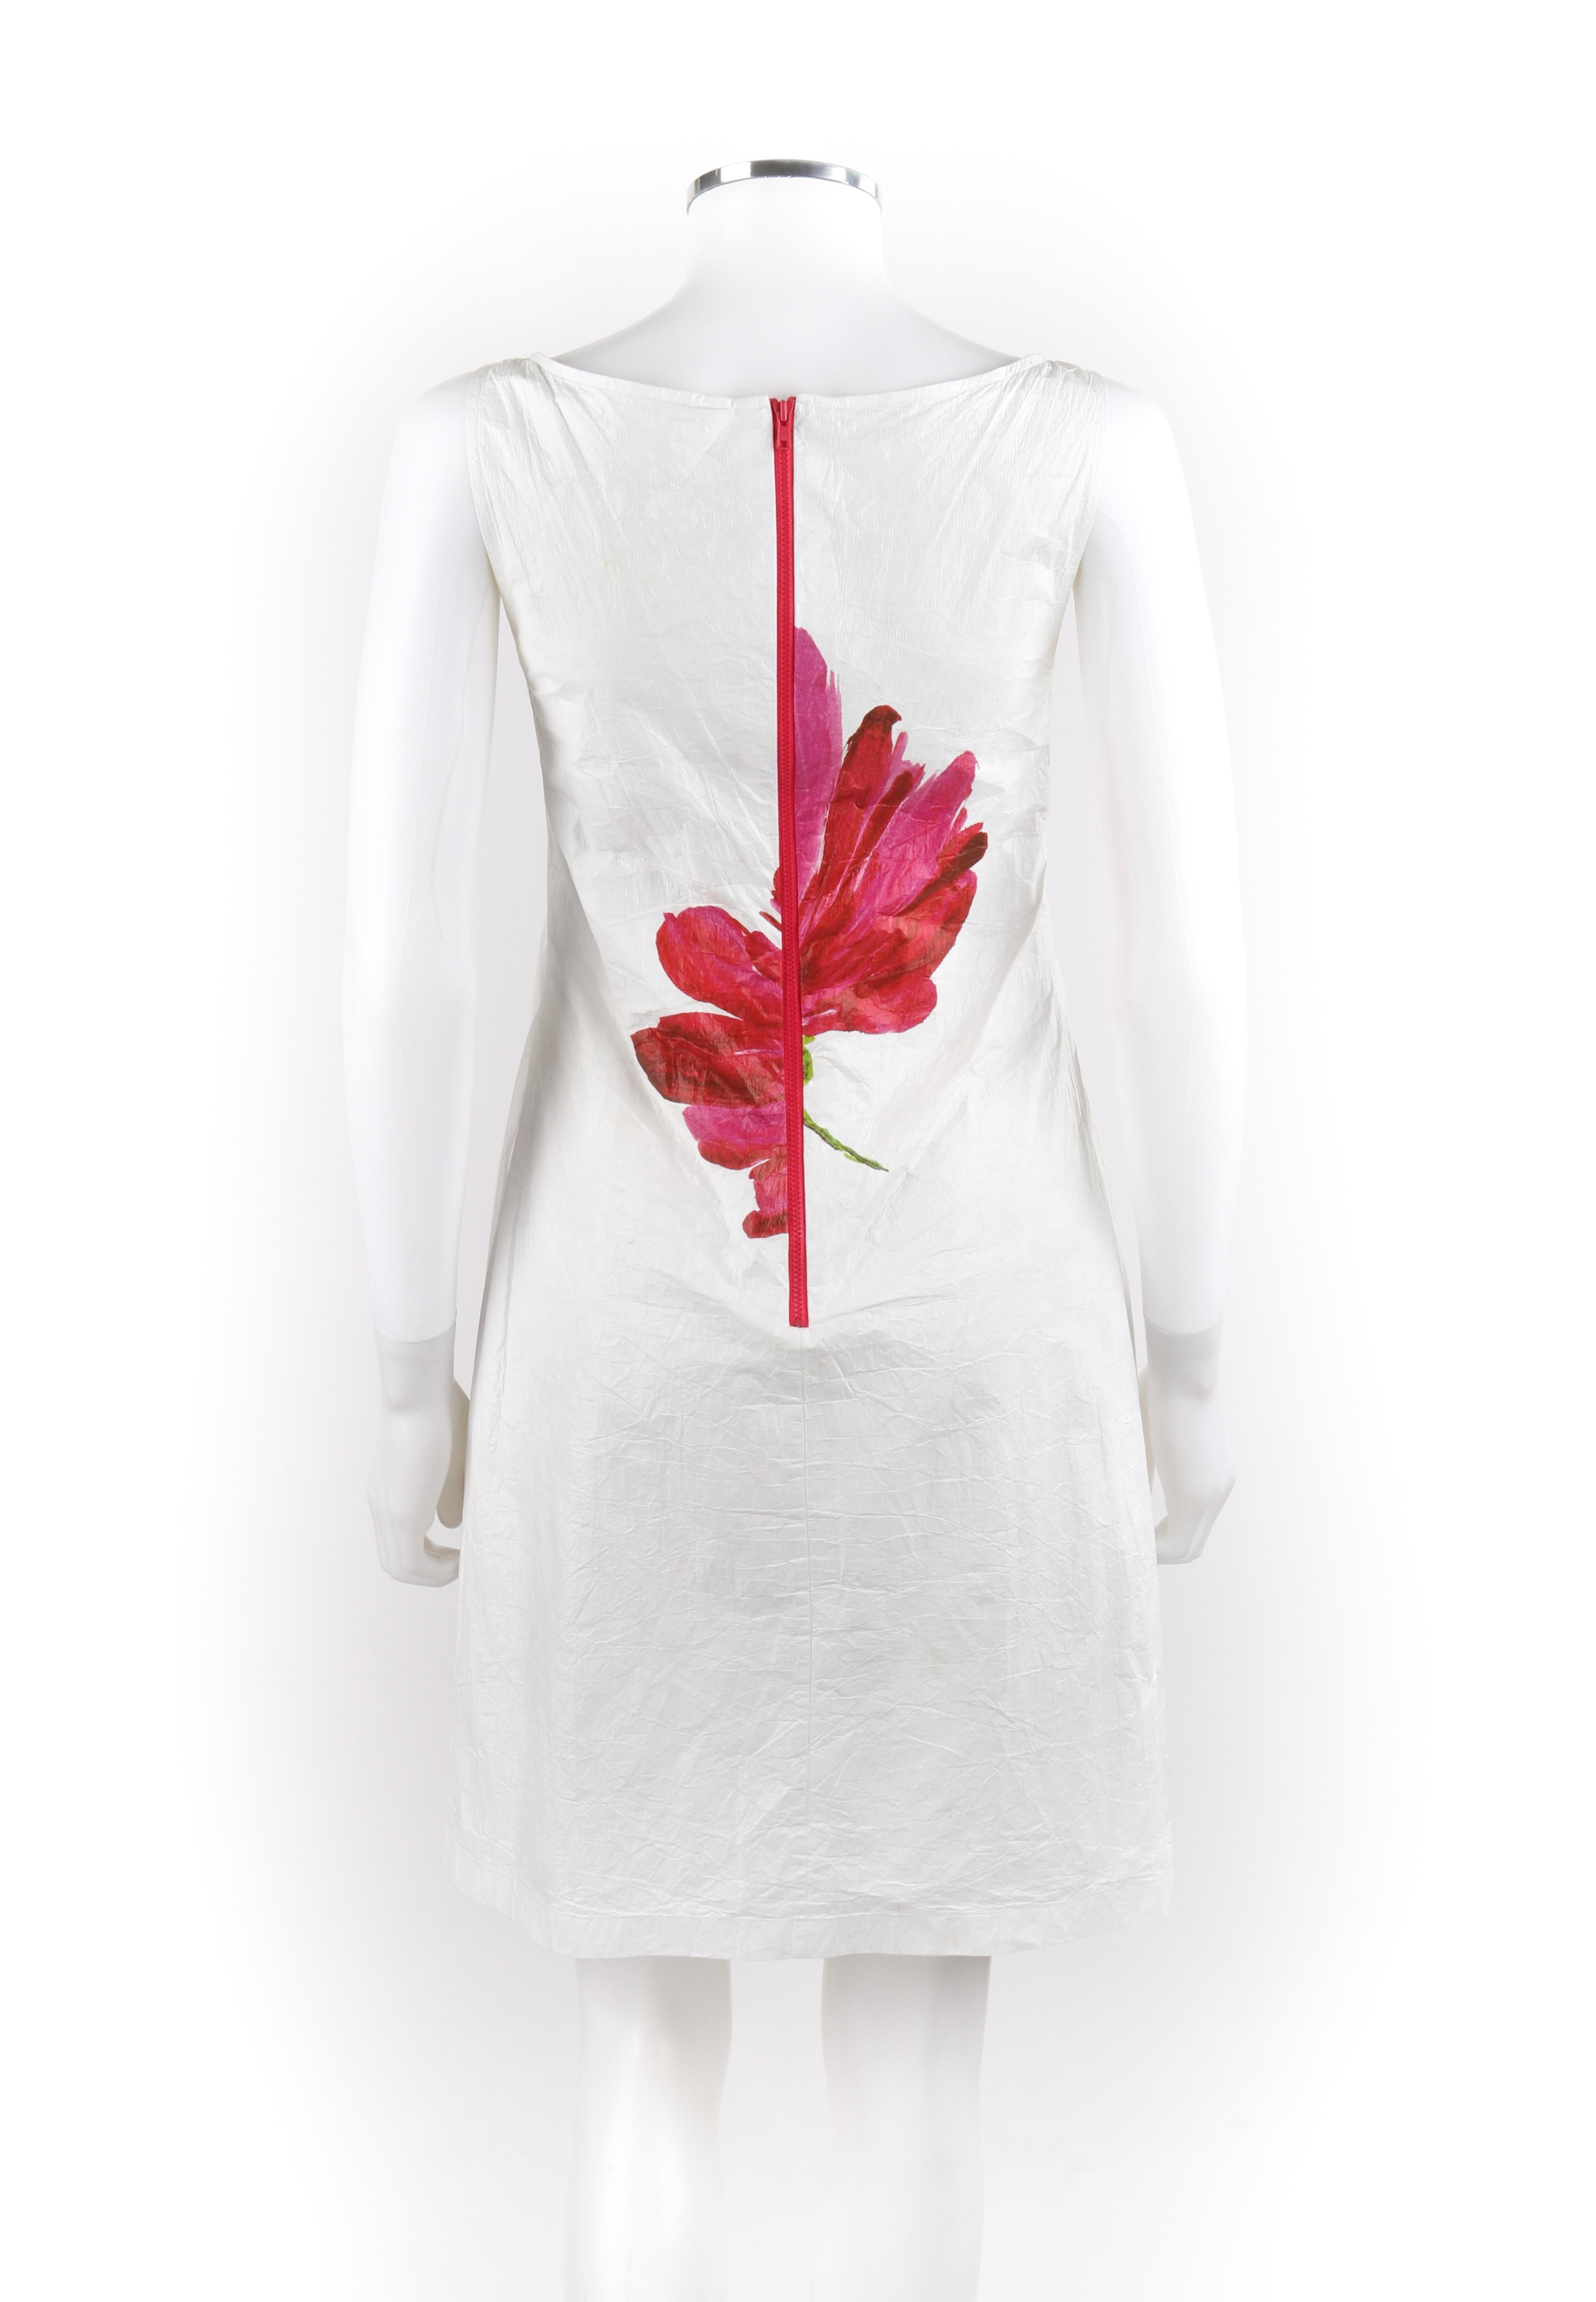 VIVIENNE TAM S/S 2009 Olefin Crinkle White Pink Red Flower Boat Neck Shift Dress In Good Condition For Sale In Thiensville, WI